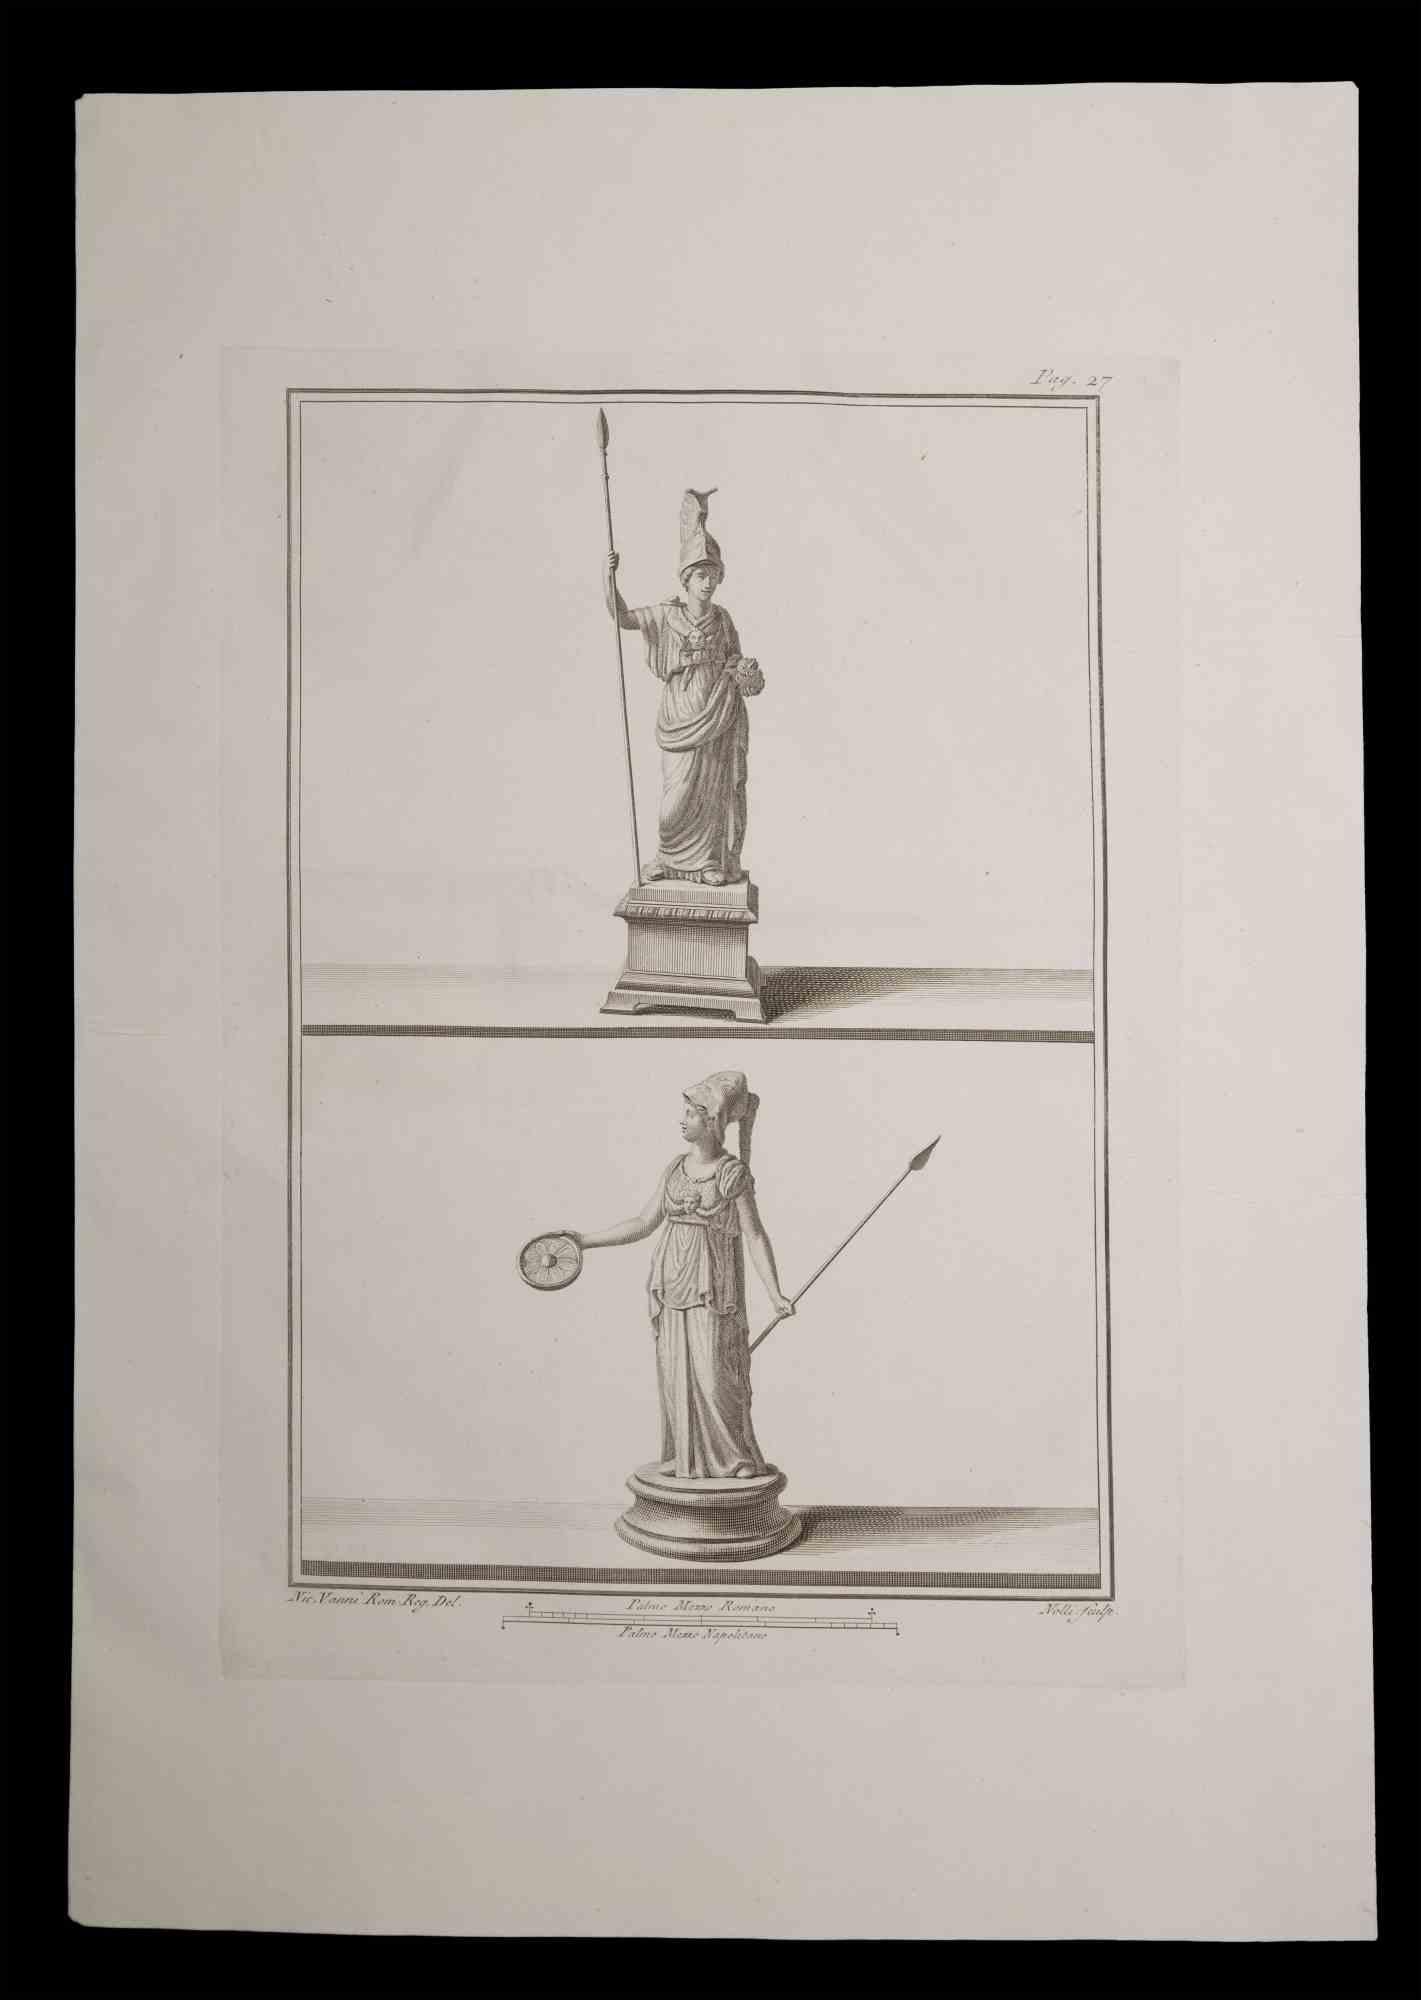 Ancient Roman Statue, from the series "Antiquities of Herculaneum", is an original etching on paper realized by Carlo Nolli in the 18th Century.

Signed on the plate, on the lower right.

Good conditions with slight folding.

The etching belongs to